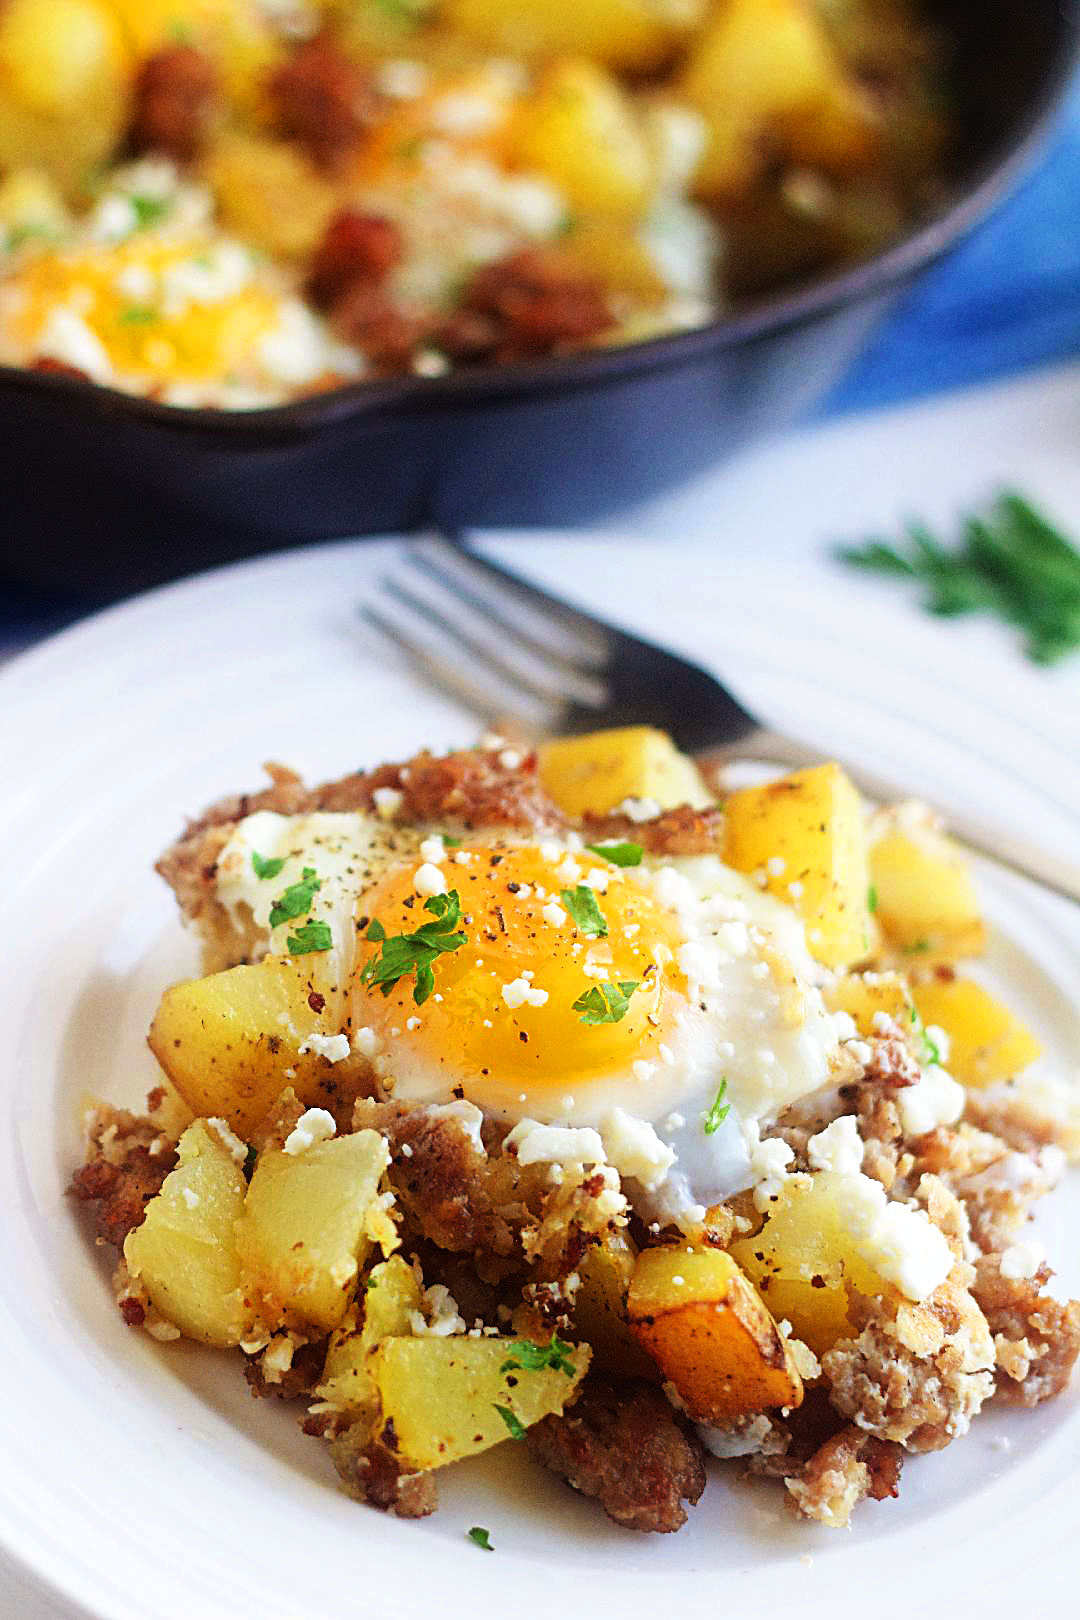 This breakfast hash is filled with sausage, egg and feta cheese. Life-in-the-Lofthouse.com